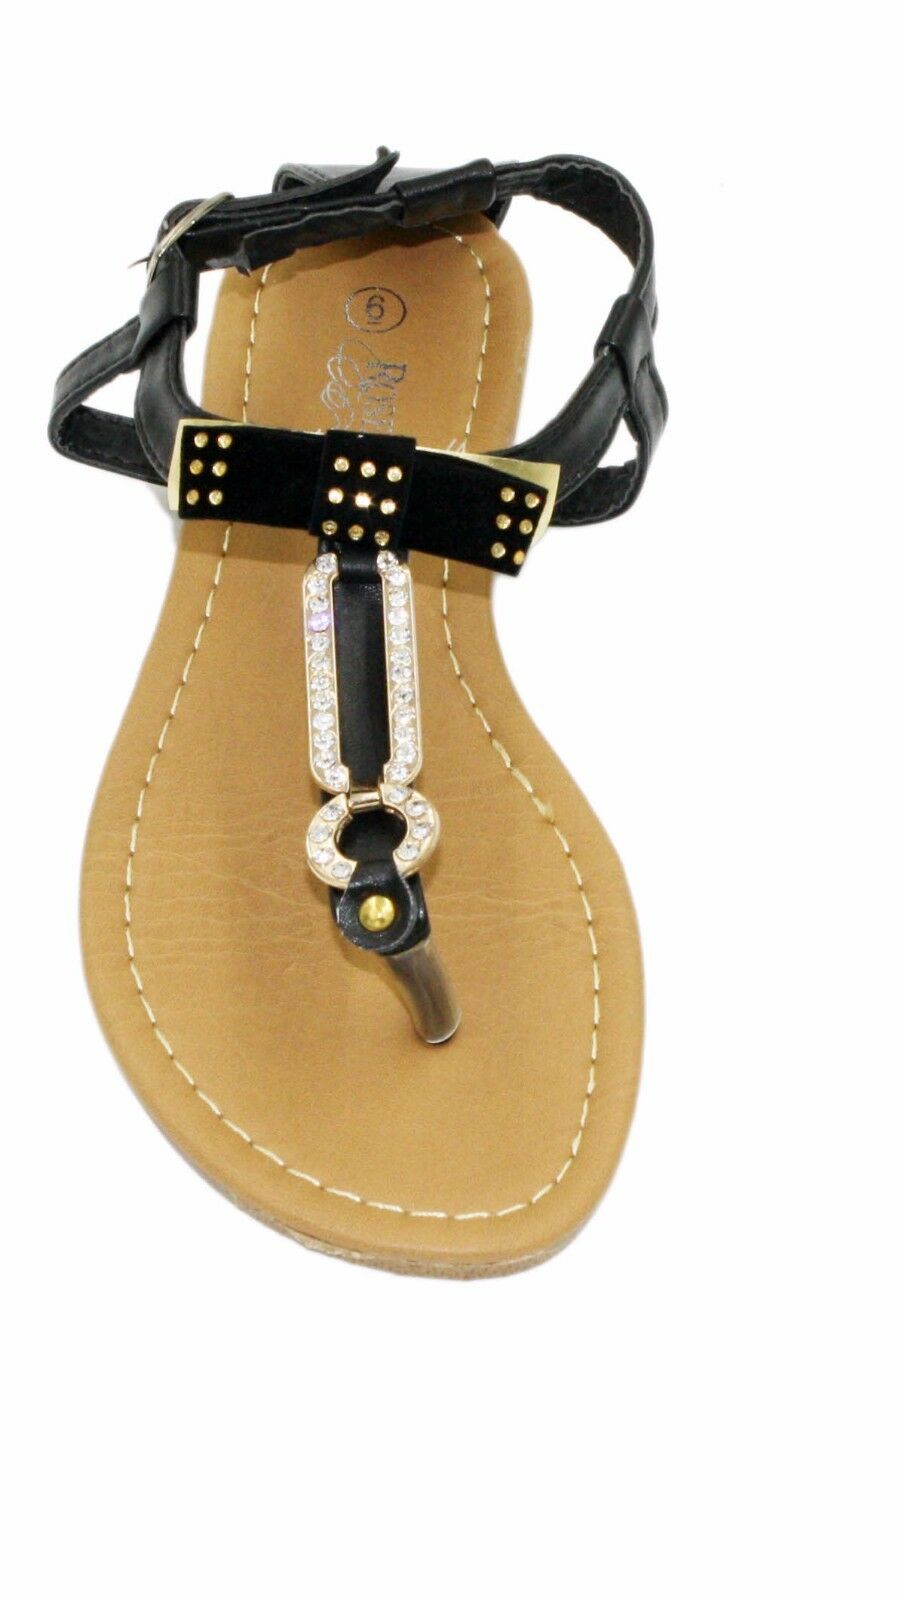 Ladies Fashion Sandals Wholesale Prices Only - Dona Michi Leather